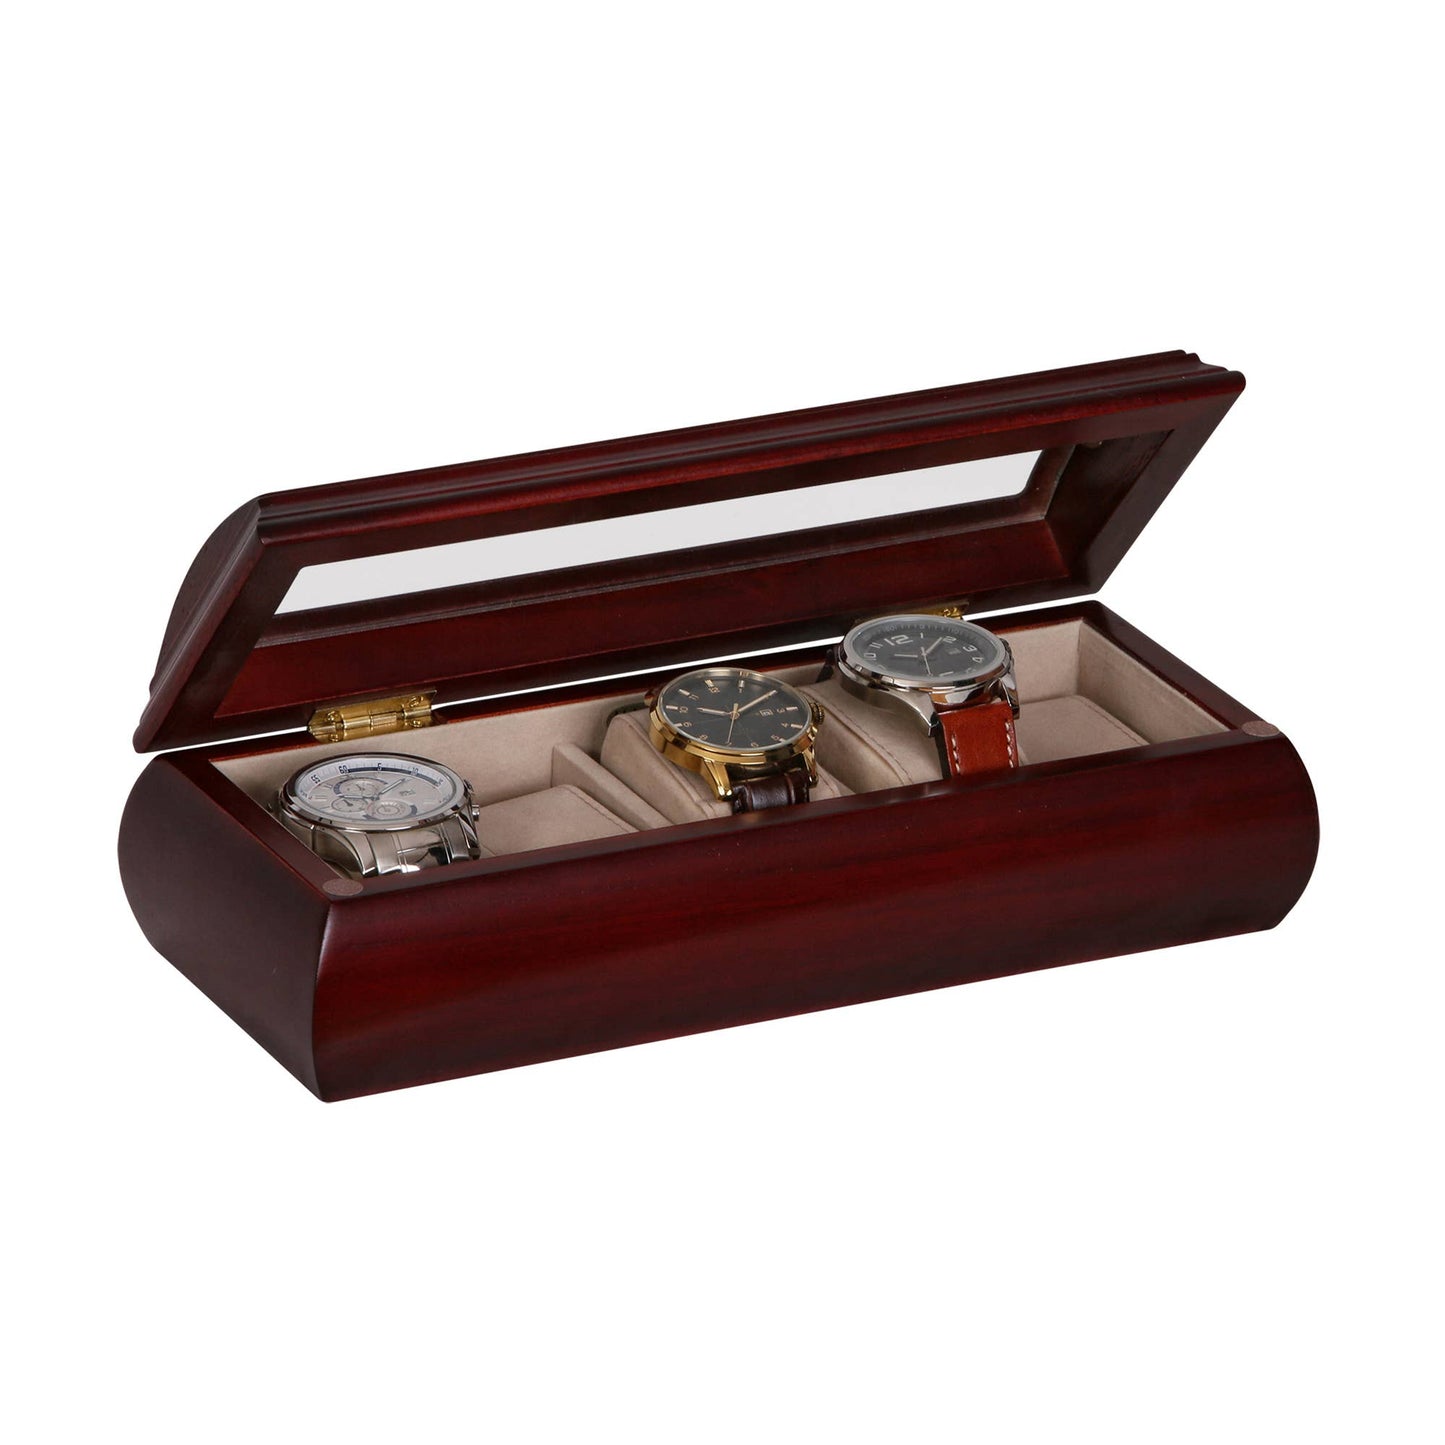 Mele & Co. "Emery" Domed Glass Lid & Cherry Finish Watch Box